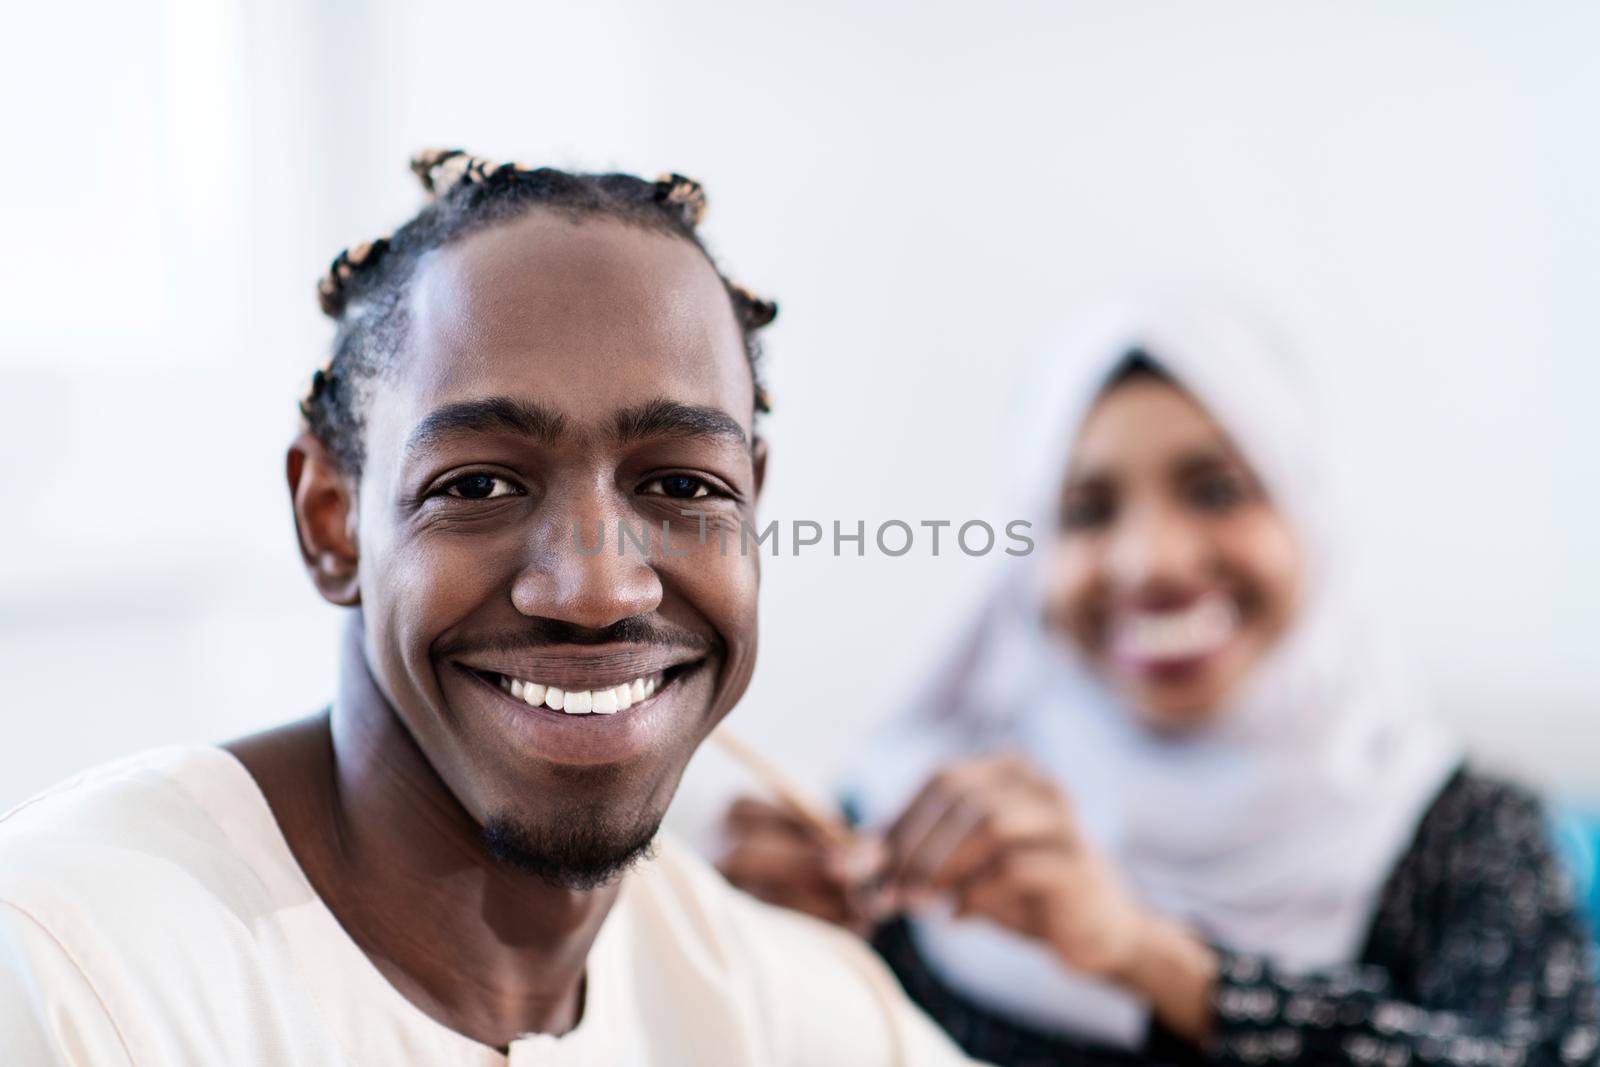 young afro modern muslim couple having romantic time at home while woman making hairstyle to husband female wearing traditional sudan islamic hijab clothes